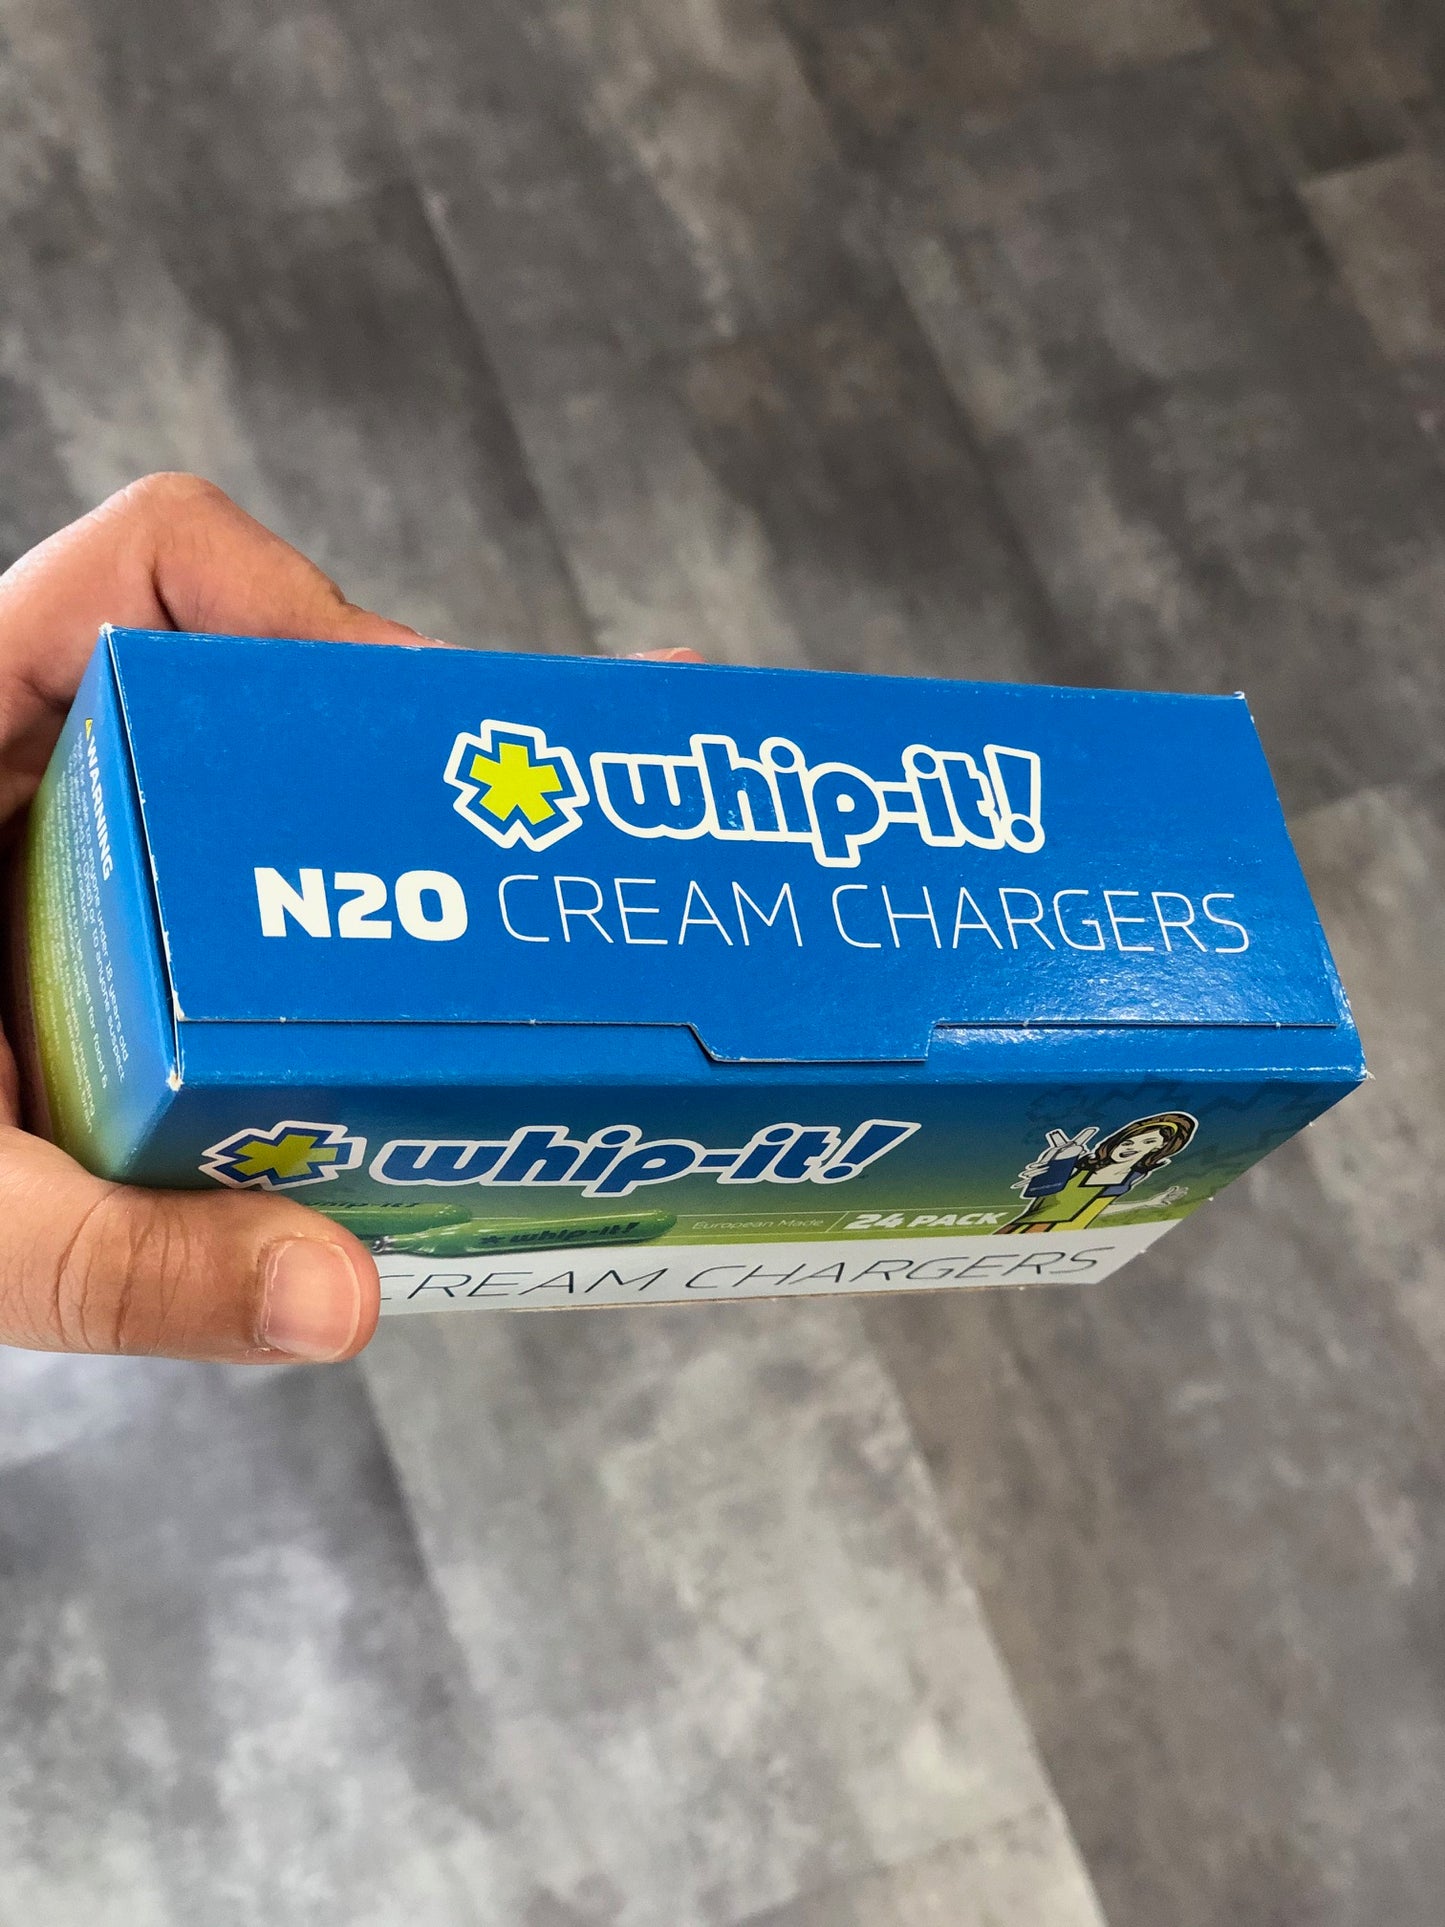 Whip-It Whipped Cream Charger